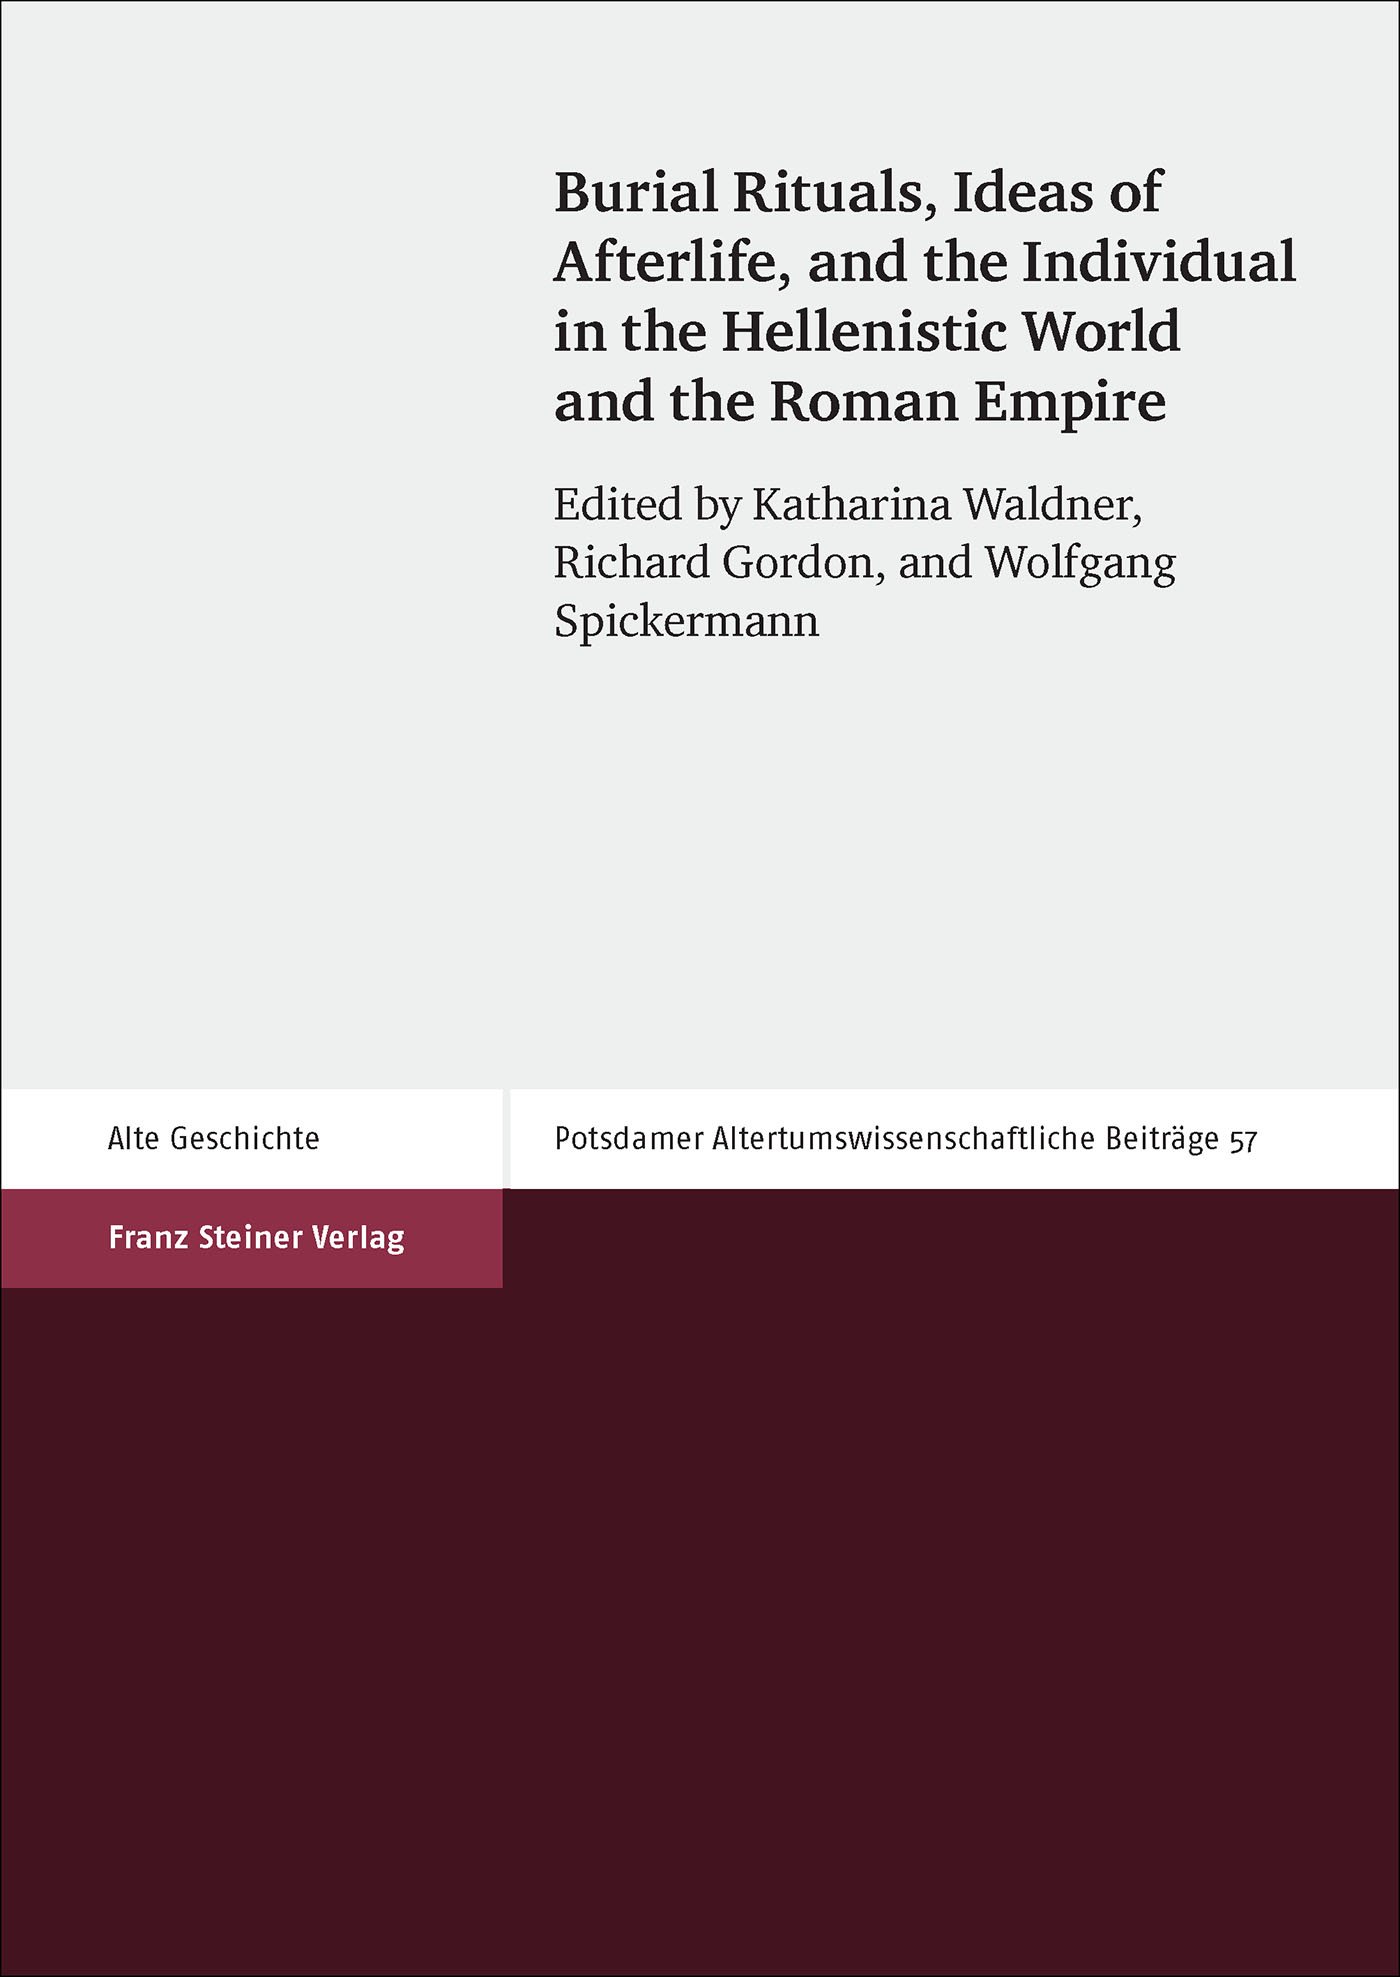 Burial Rituals, Ideas of Afterlife, and the Individual in the Hellenistic World and the Roman Empire